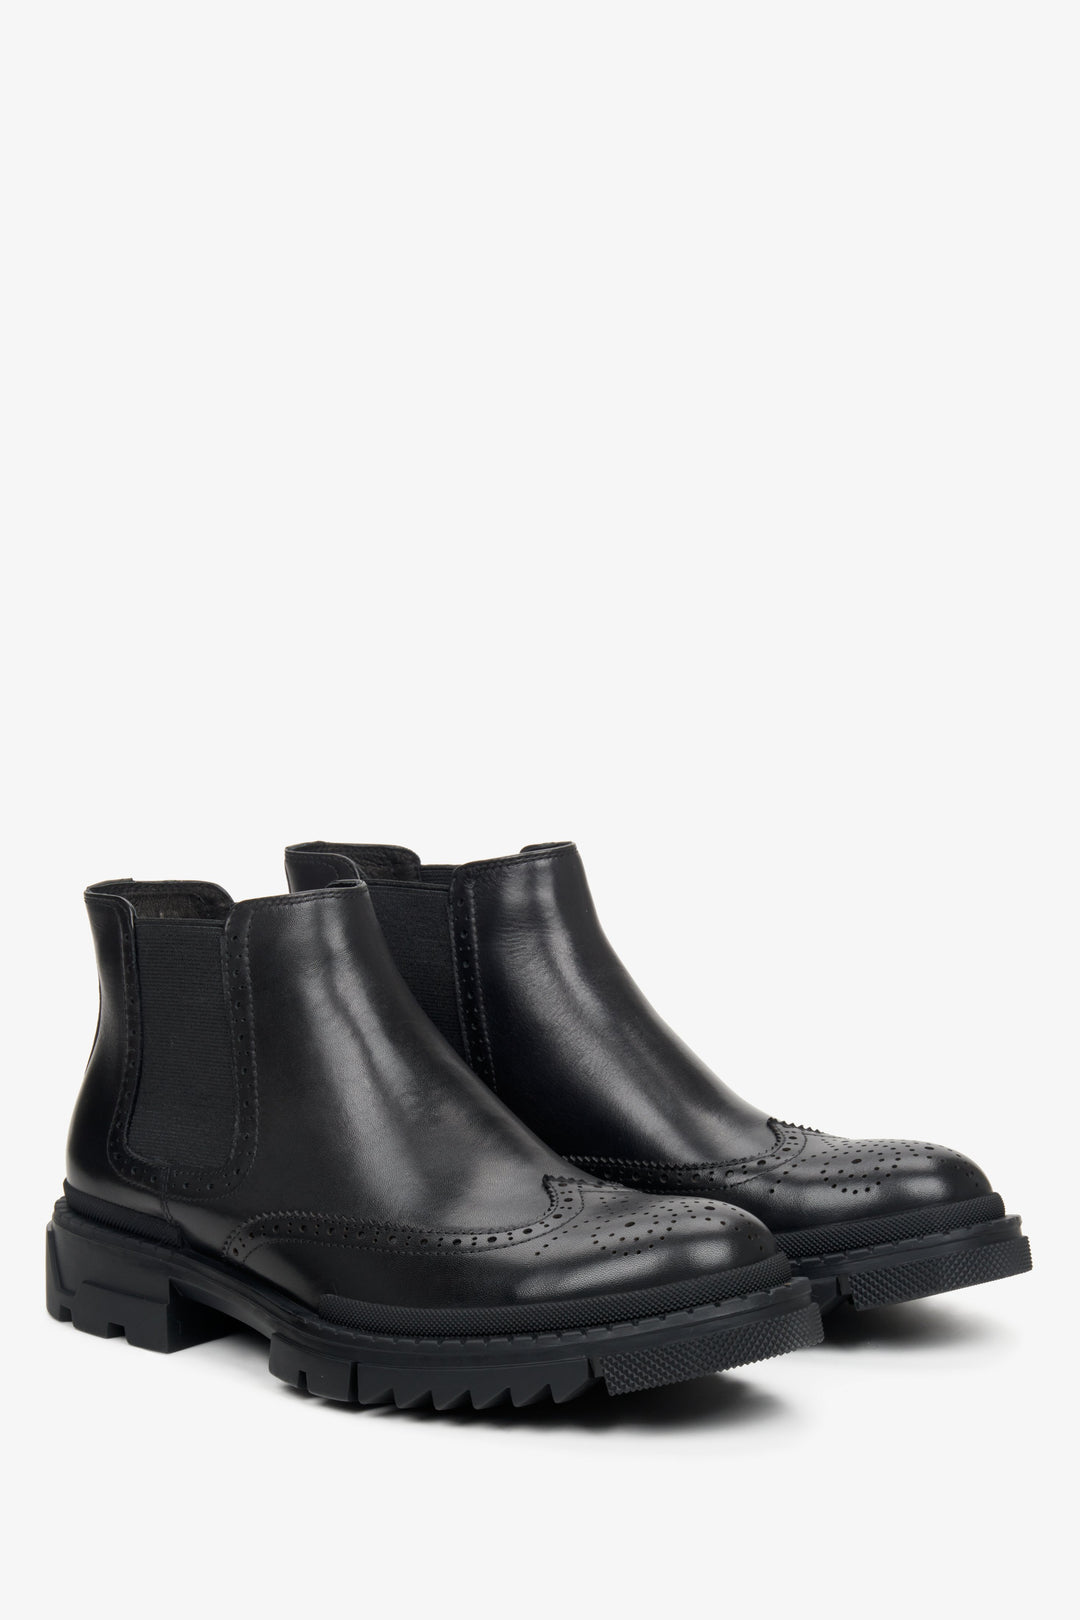 Men's black leather ankle boots by Estro - presentation of the side and front part of the boot.